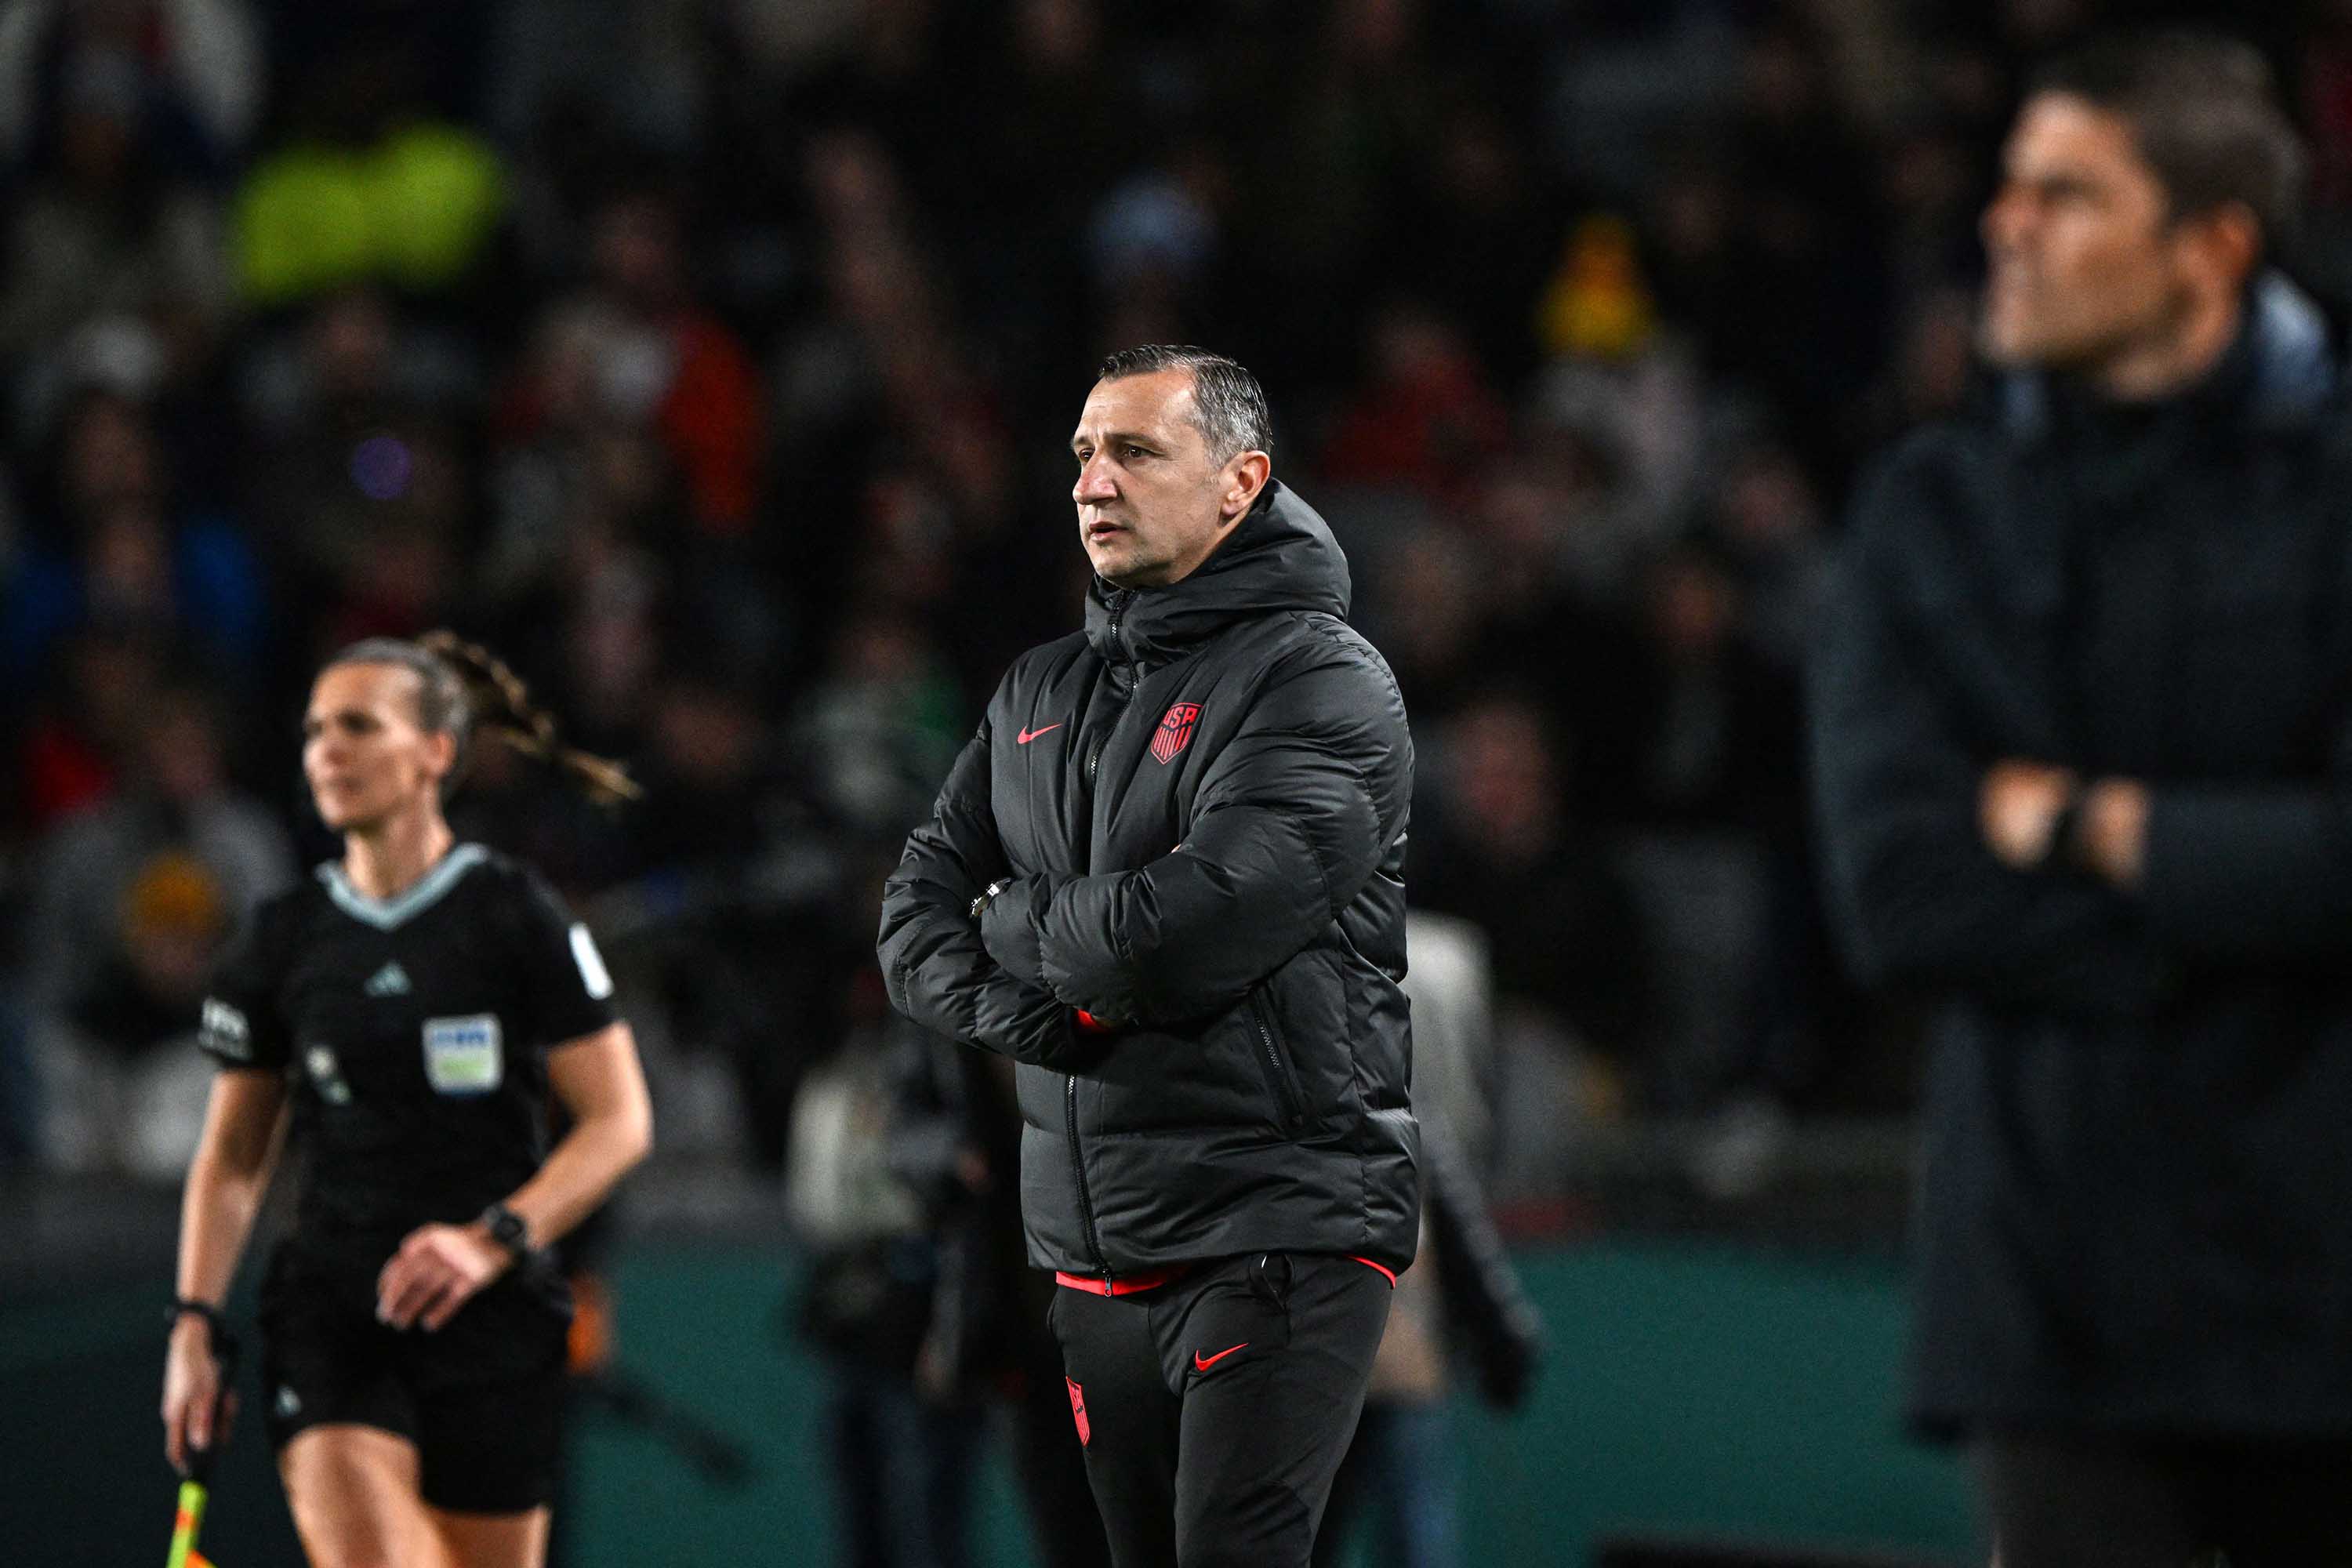 USA's coach Vlatko Andonovski, center, looks on next to Portugal's coach Francisco Neto, right, during the match between Portugal and the United States at Eden Park in Auckland, New Zealand, on August 1. 